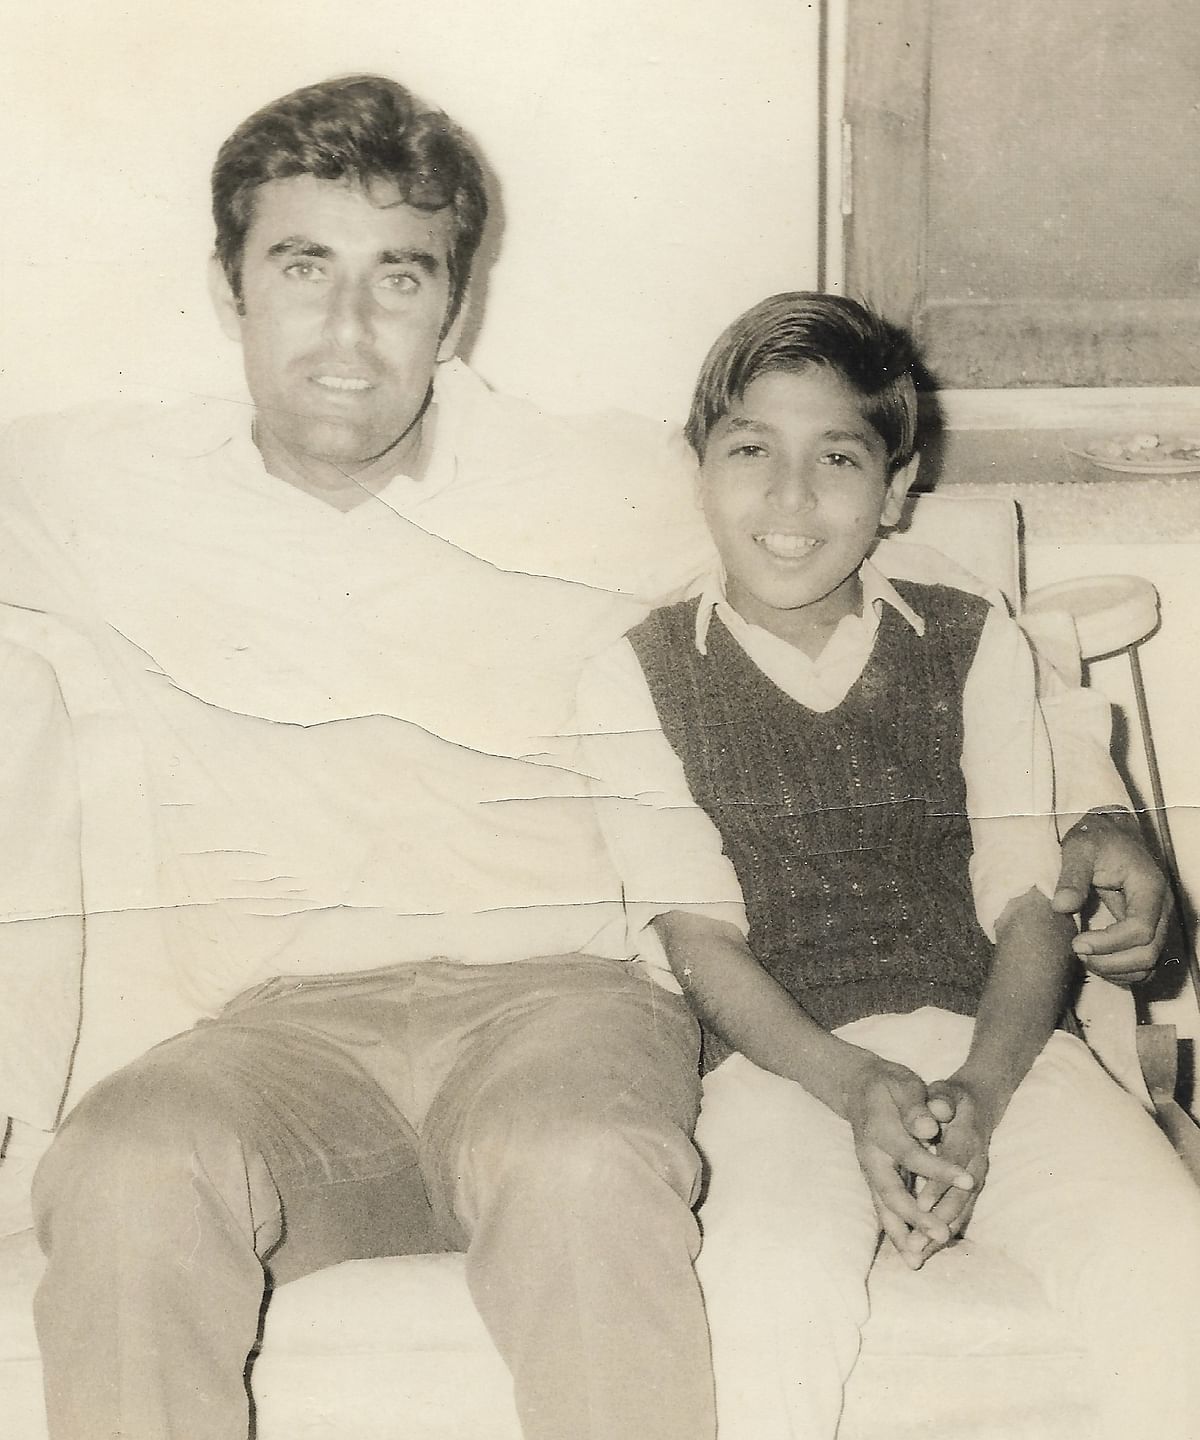 Salim Durrani was a sportsman to the core who believed in spirited combat but had the heart of a child. 